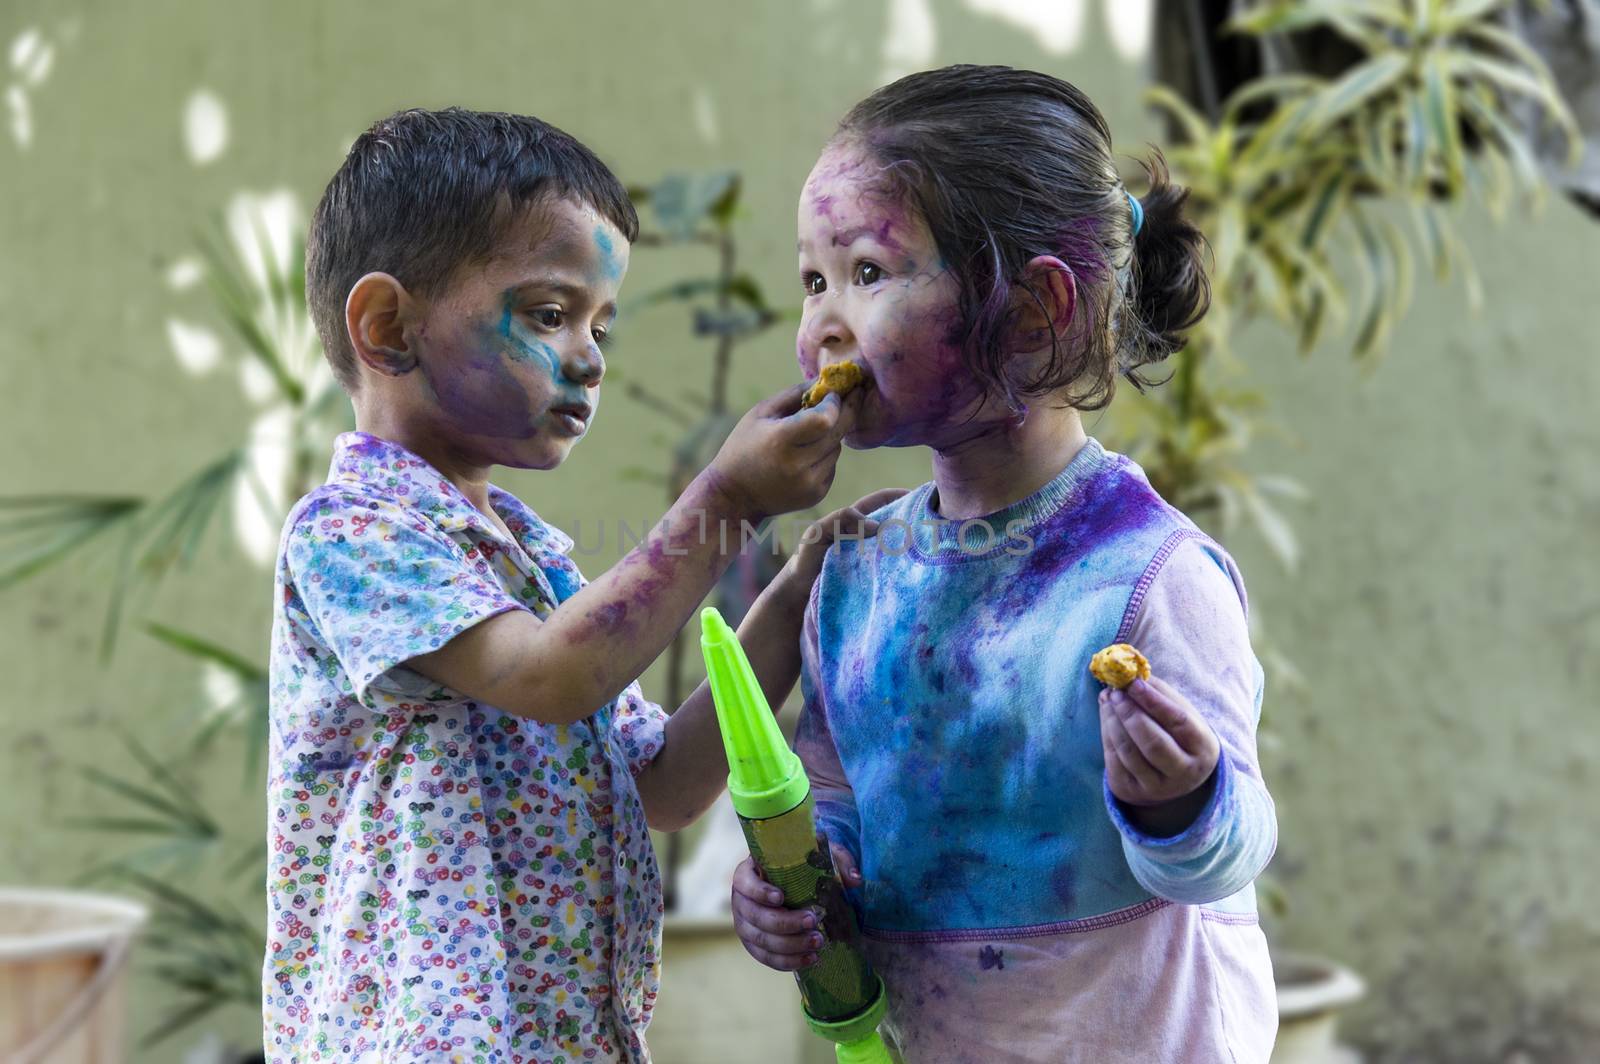 Brother and sister with their face smeared with colors celebrating Holi festival in India.